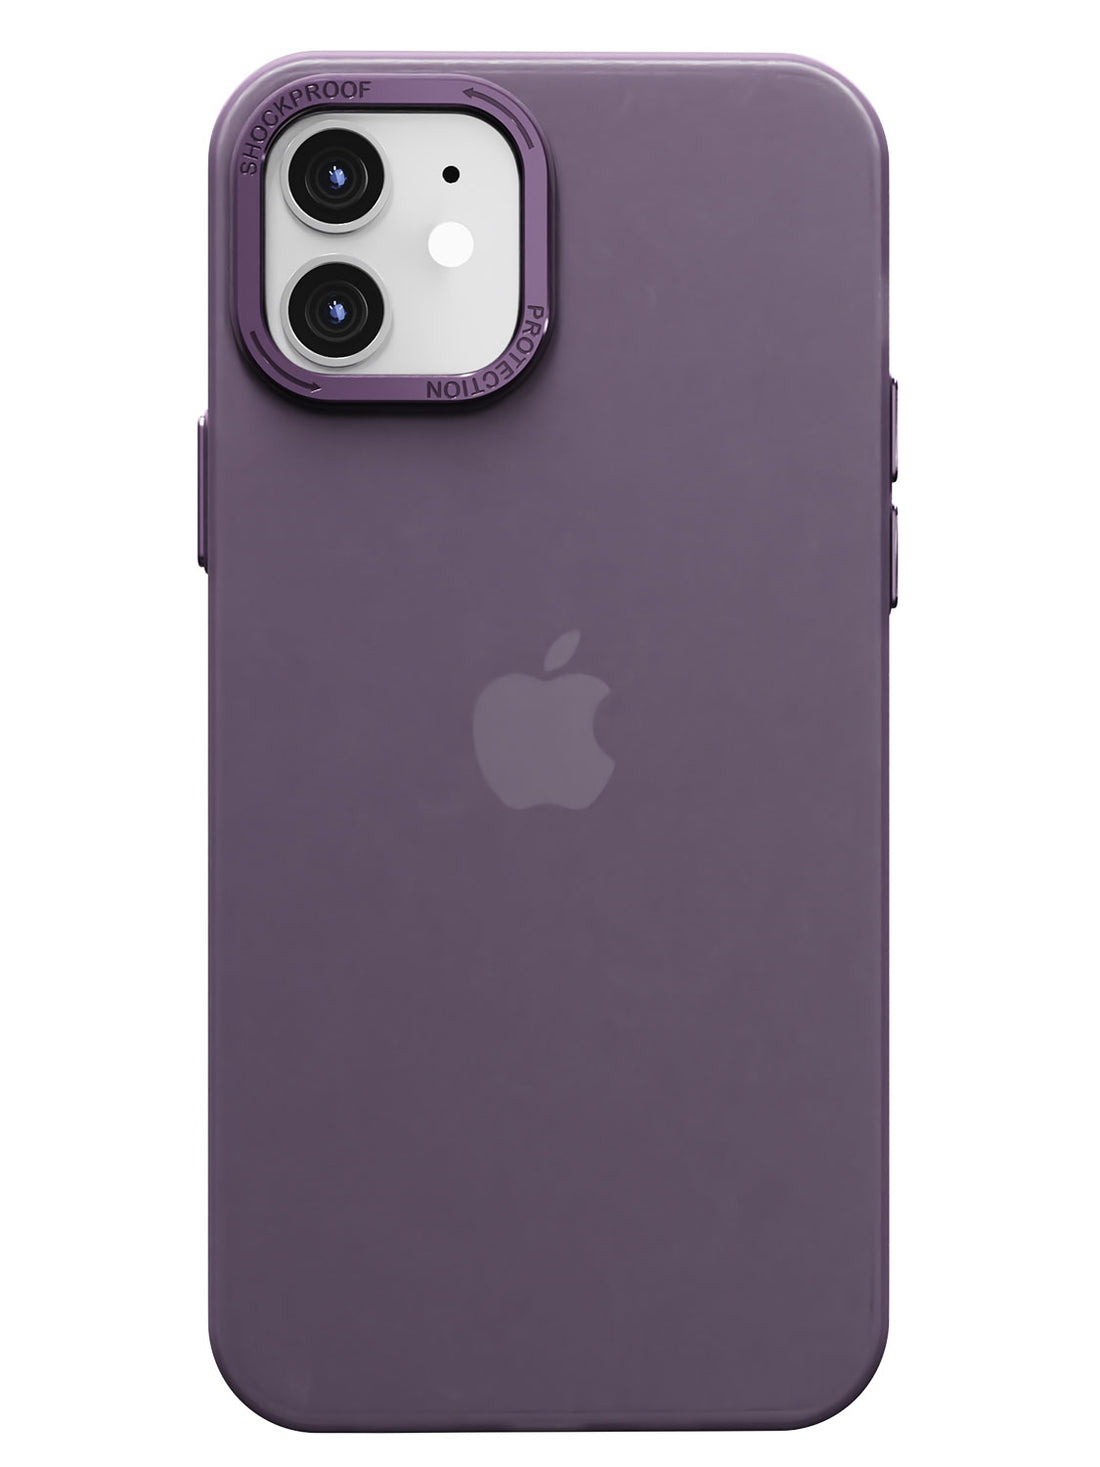 iphone 12 case with camera protection , iphone 12 cover with camera protection , iphone 12 case cover with camera protection , iphone 12 back cover with camera protection